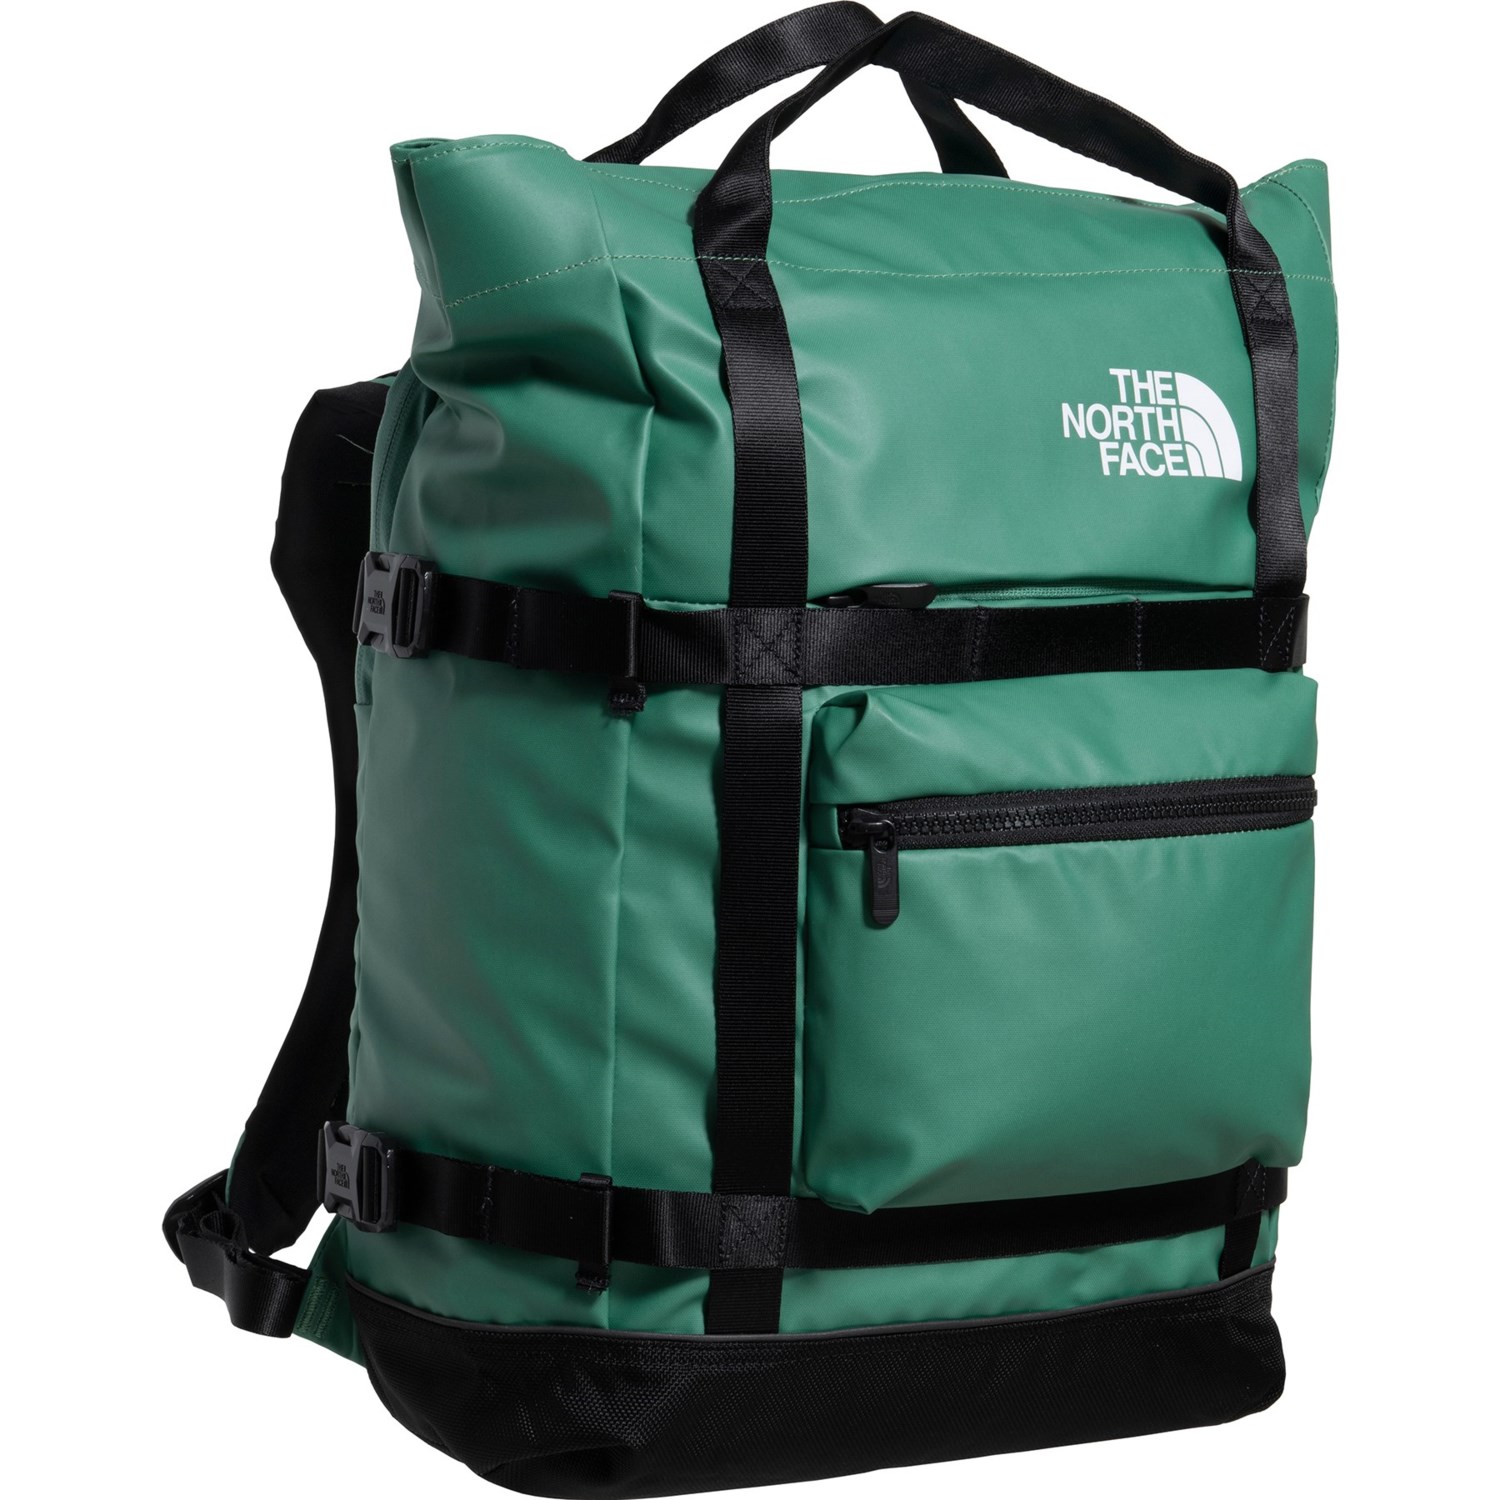 The North Face Large Commuter 32 L Backpack - Deep Grass Green-TNF Black